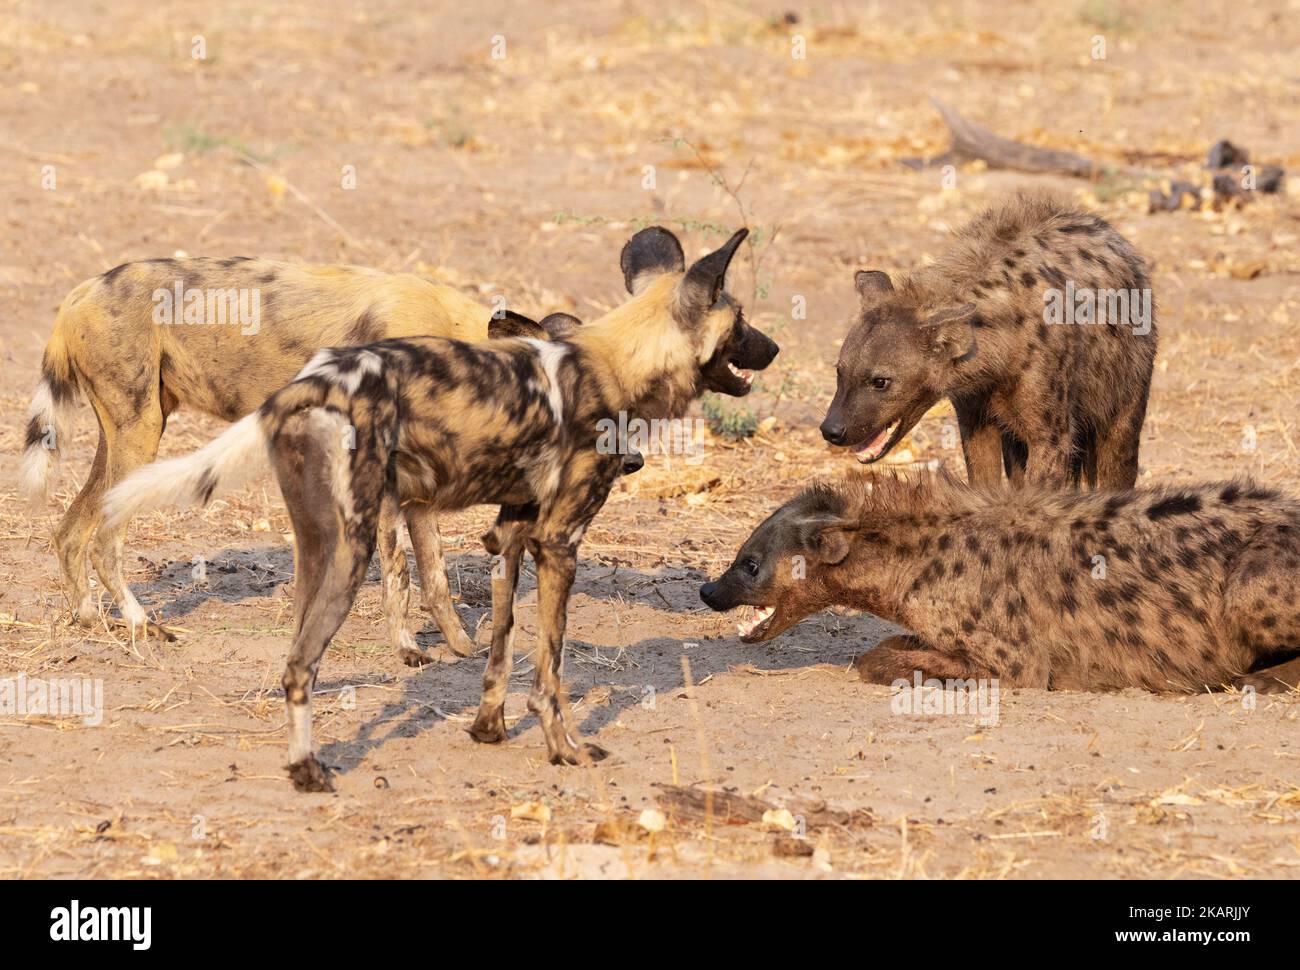 Two African Wild Dogs and two Spotted Hyenas fighting, Moremi Game Reserve, Okavango Delta, Botswana Africa. Africa wildlife. Stock Photo